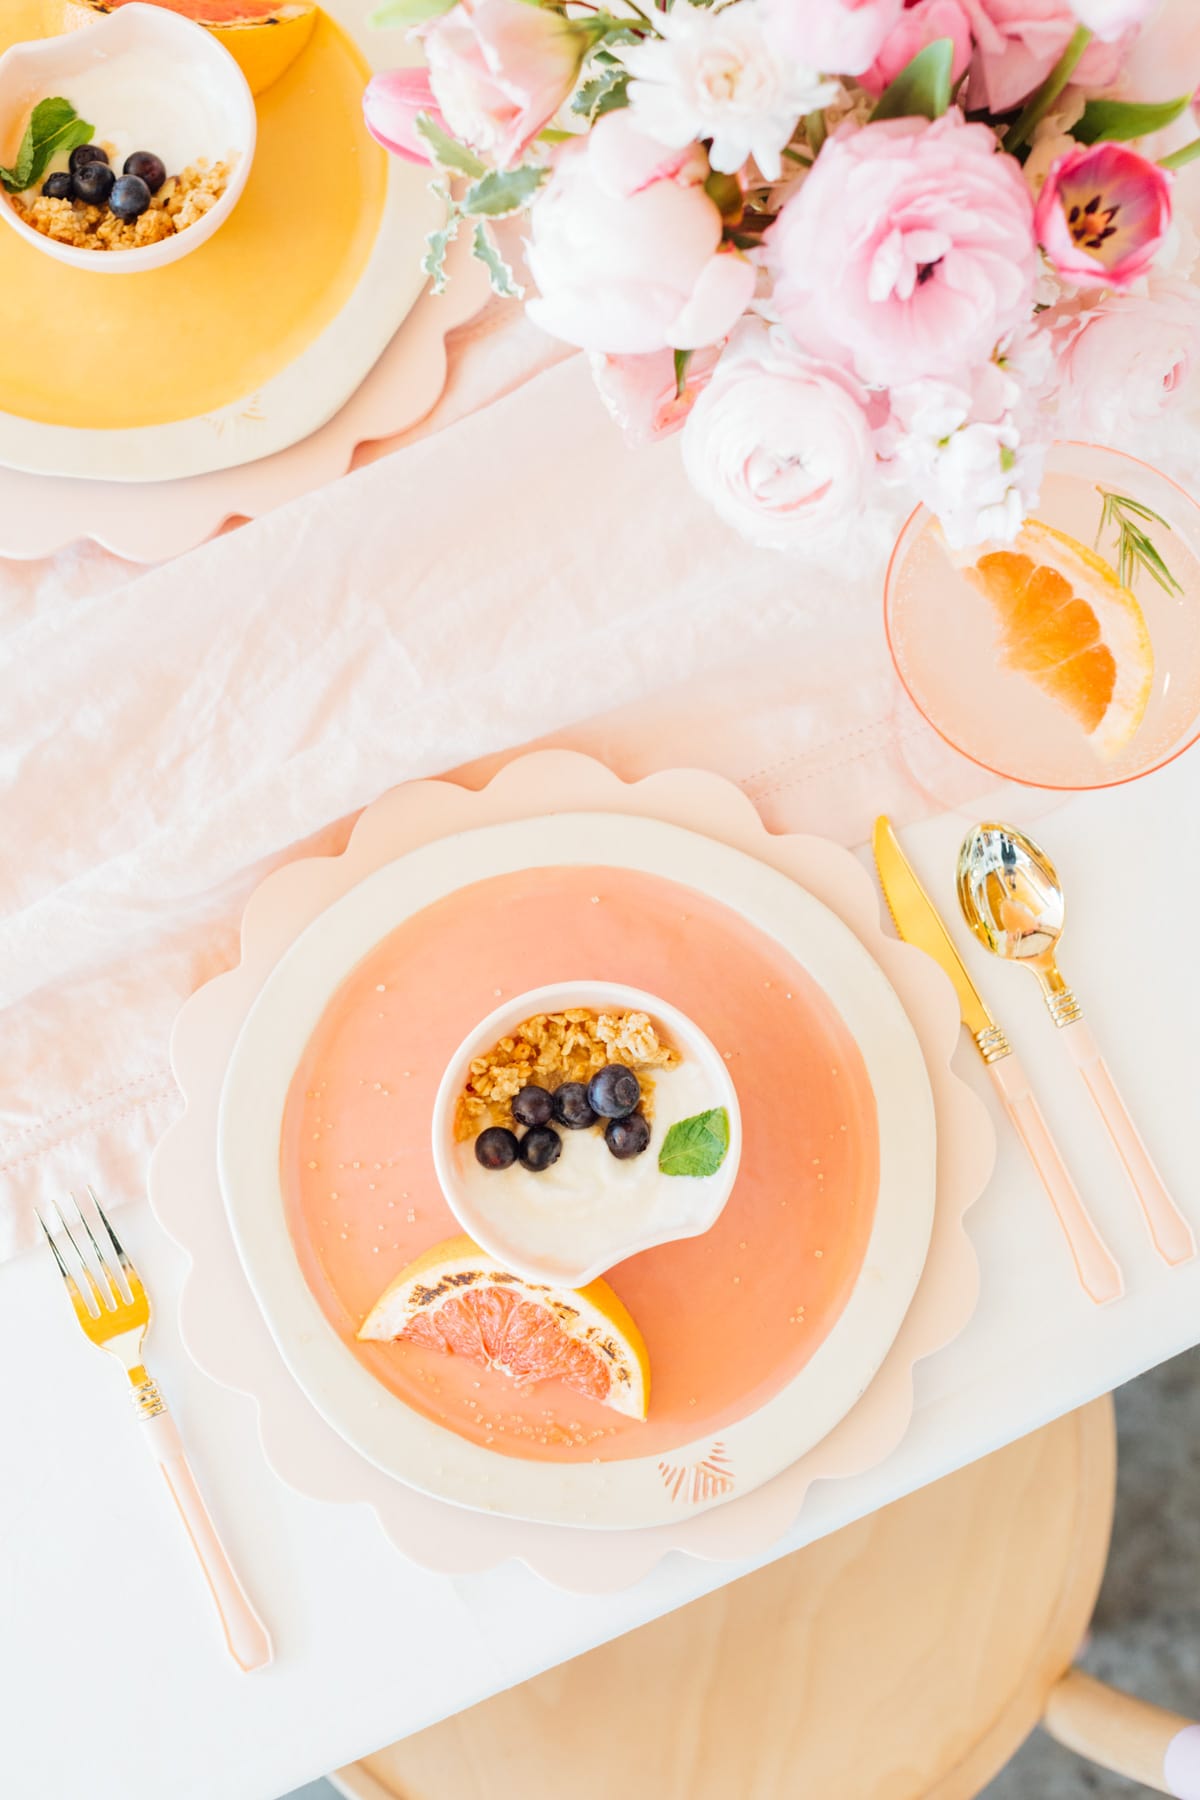 scalloped plates by Sugar & Cloth shop - A Perfectly Pastel Easter Table Idea by top Houston lifestyle blogger Ashley Rose of Sugar & Cloth #diy #tablescape #ideas #easter #pastel #party #decorations #brunch #bridalshower #bridal #shower #baby